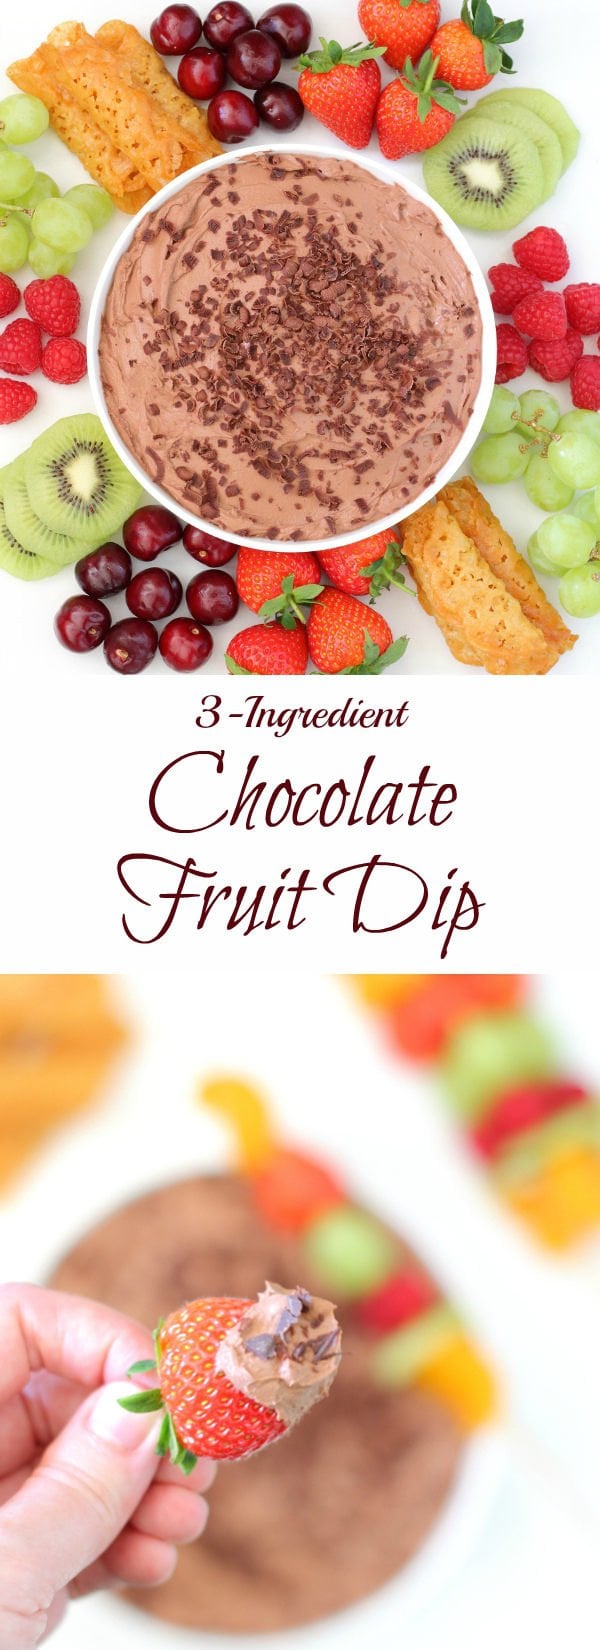 Chocolate Fruit Dip Recipe - Only three ingredients to make this thick, creamy (& healthy) fruit dip! | sliceofkitchenlife.com